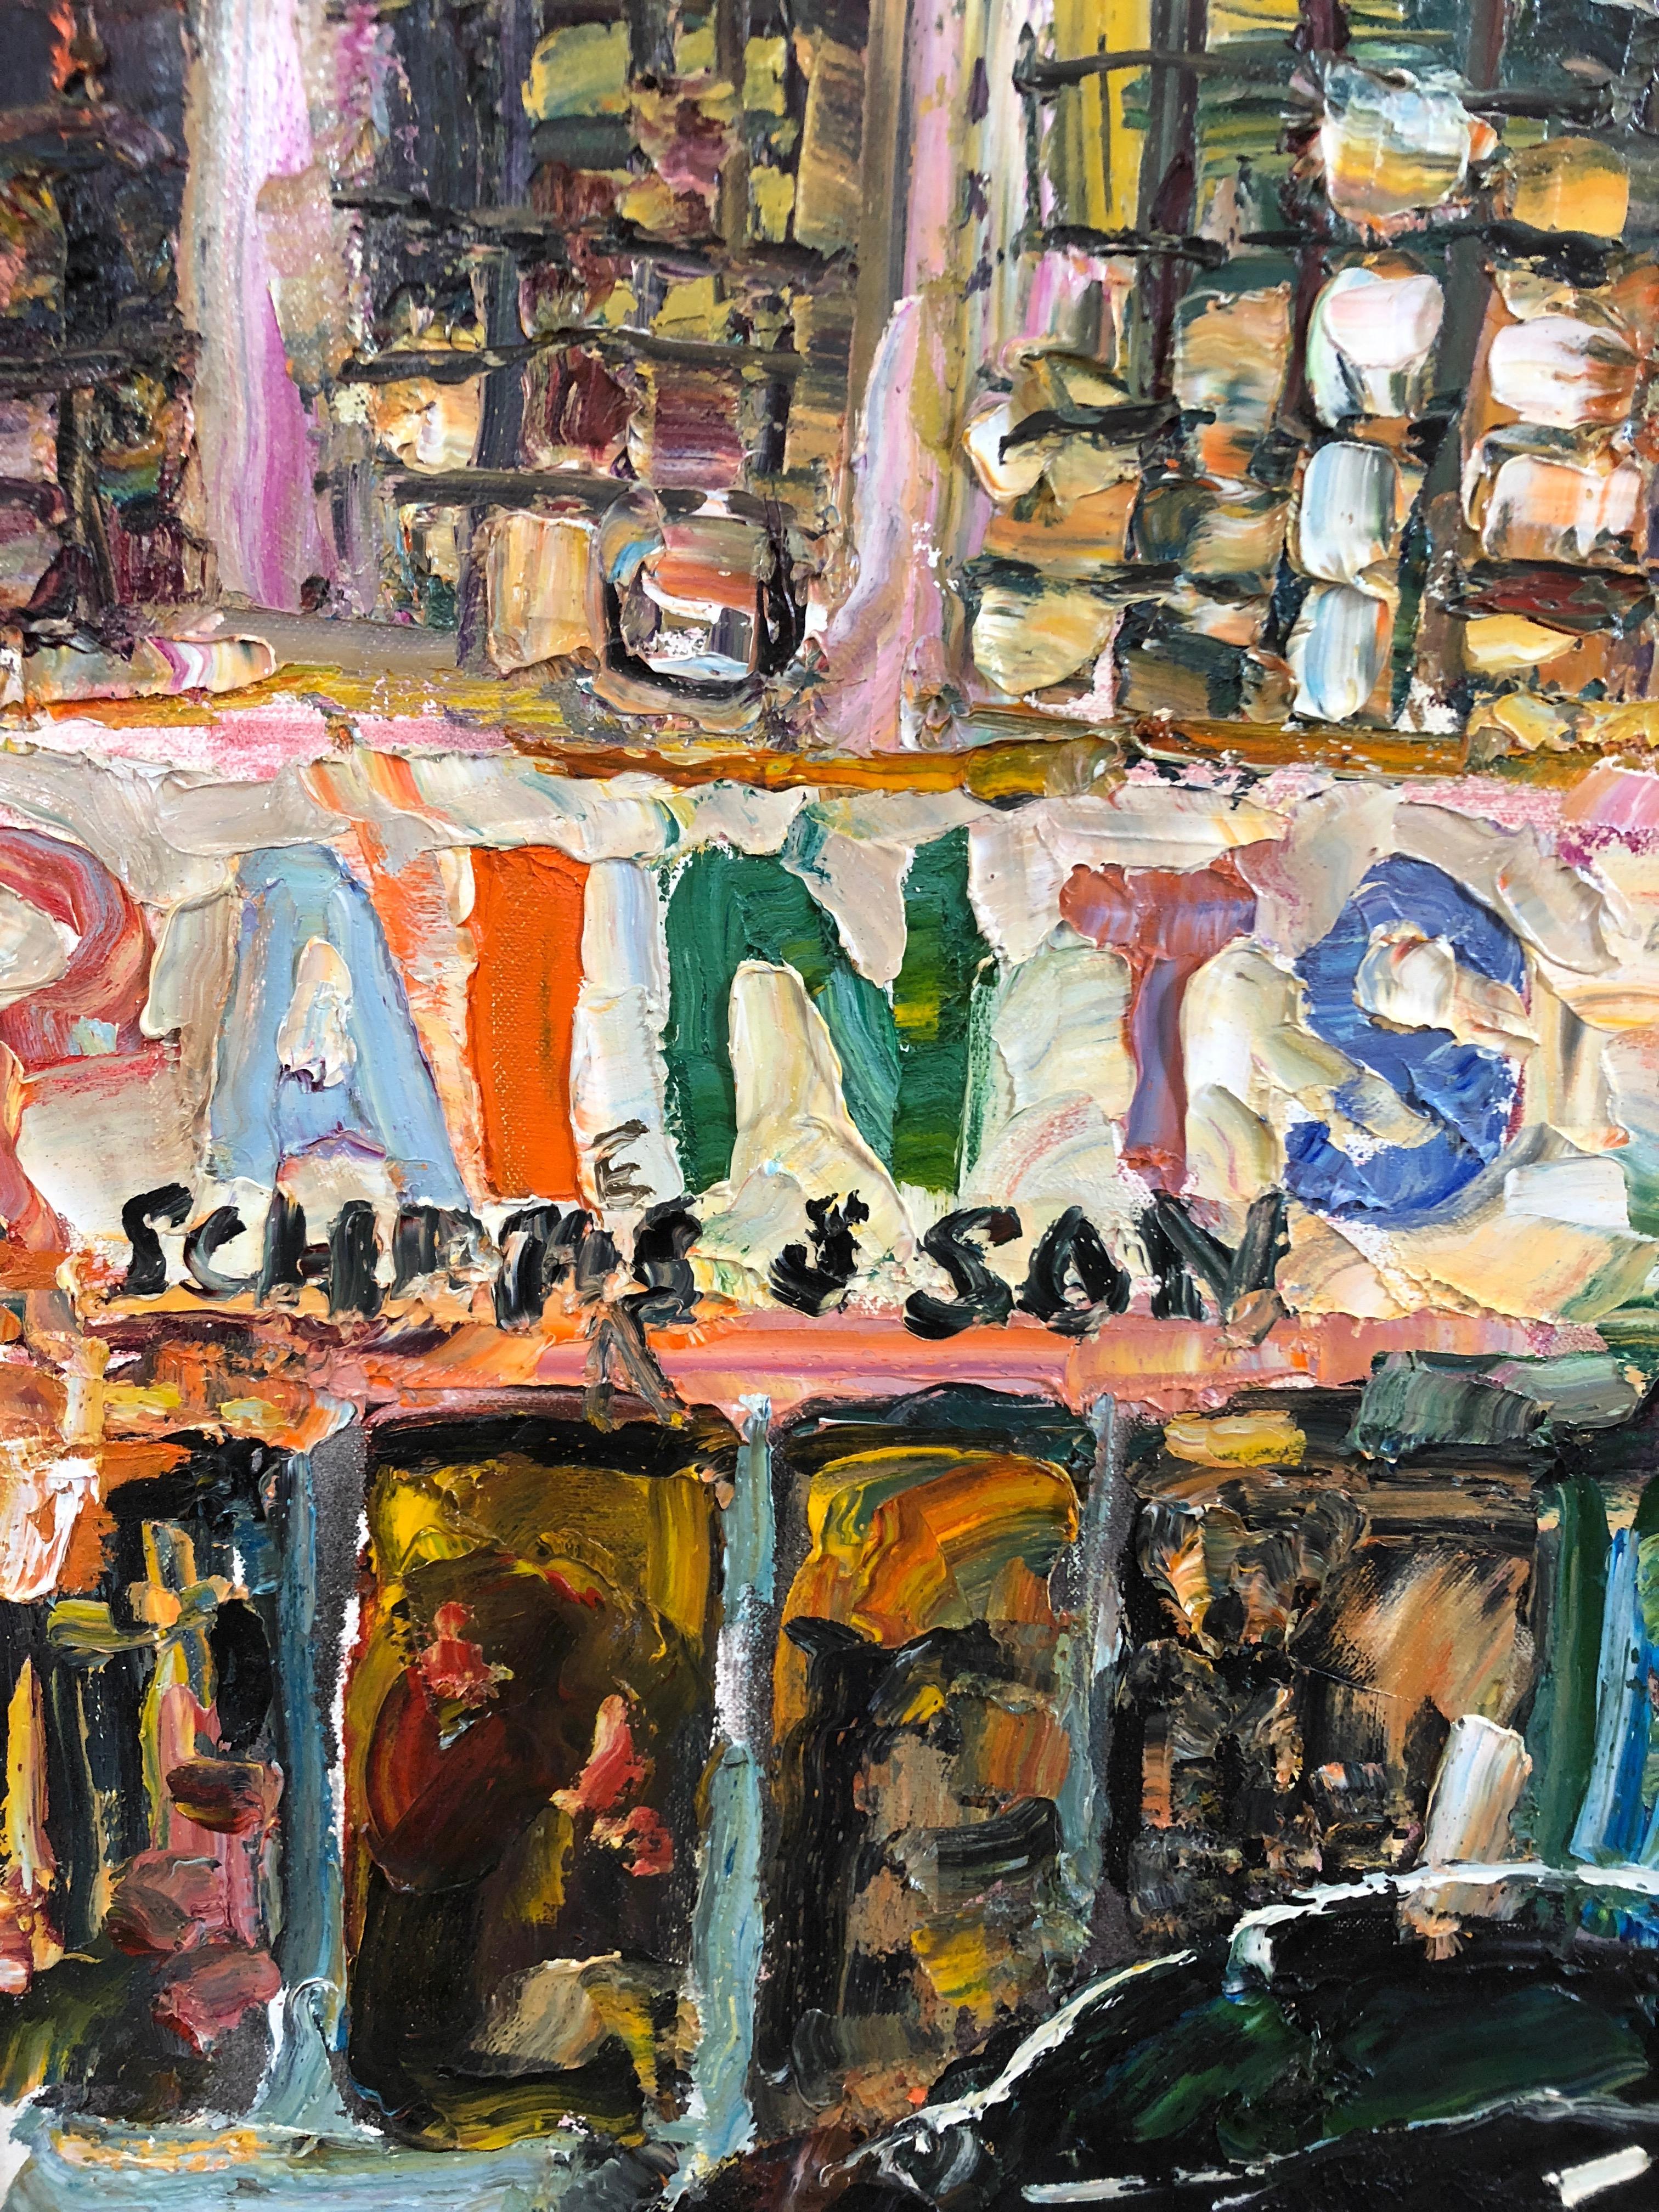 Wonderful painterly, thickly impastoed oil painting of a New York street with Paint store fascade and black parked car. A riot of color and noise packed into a medium sized canvas. By renowned plein air painter Ken McIndoe.